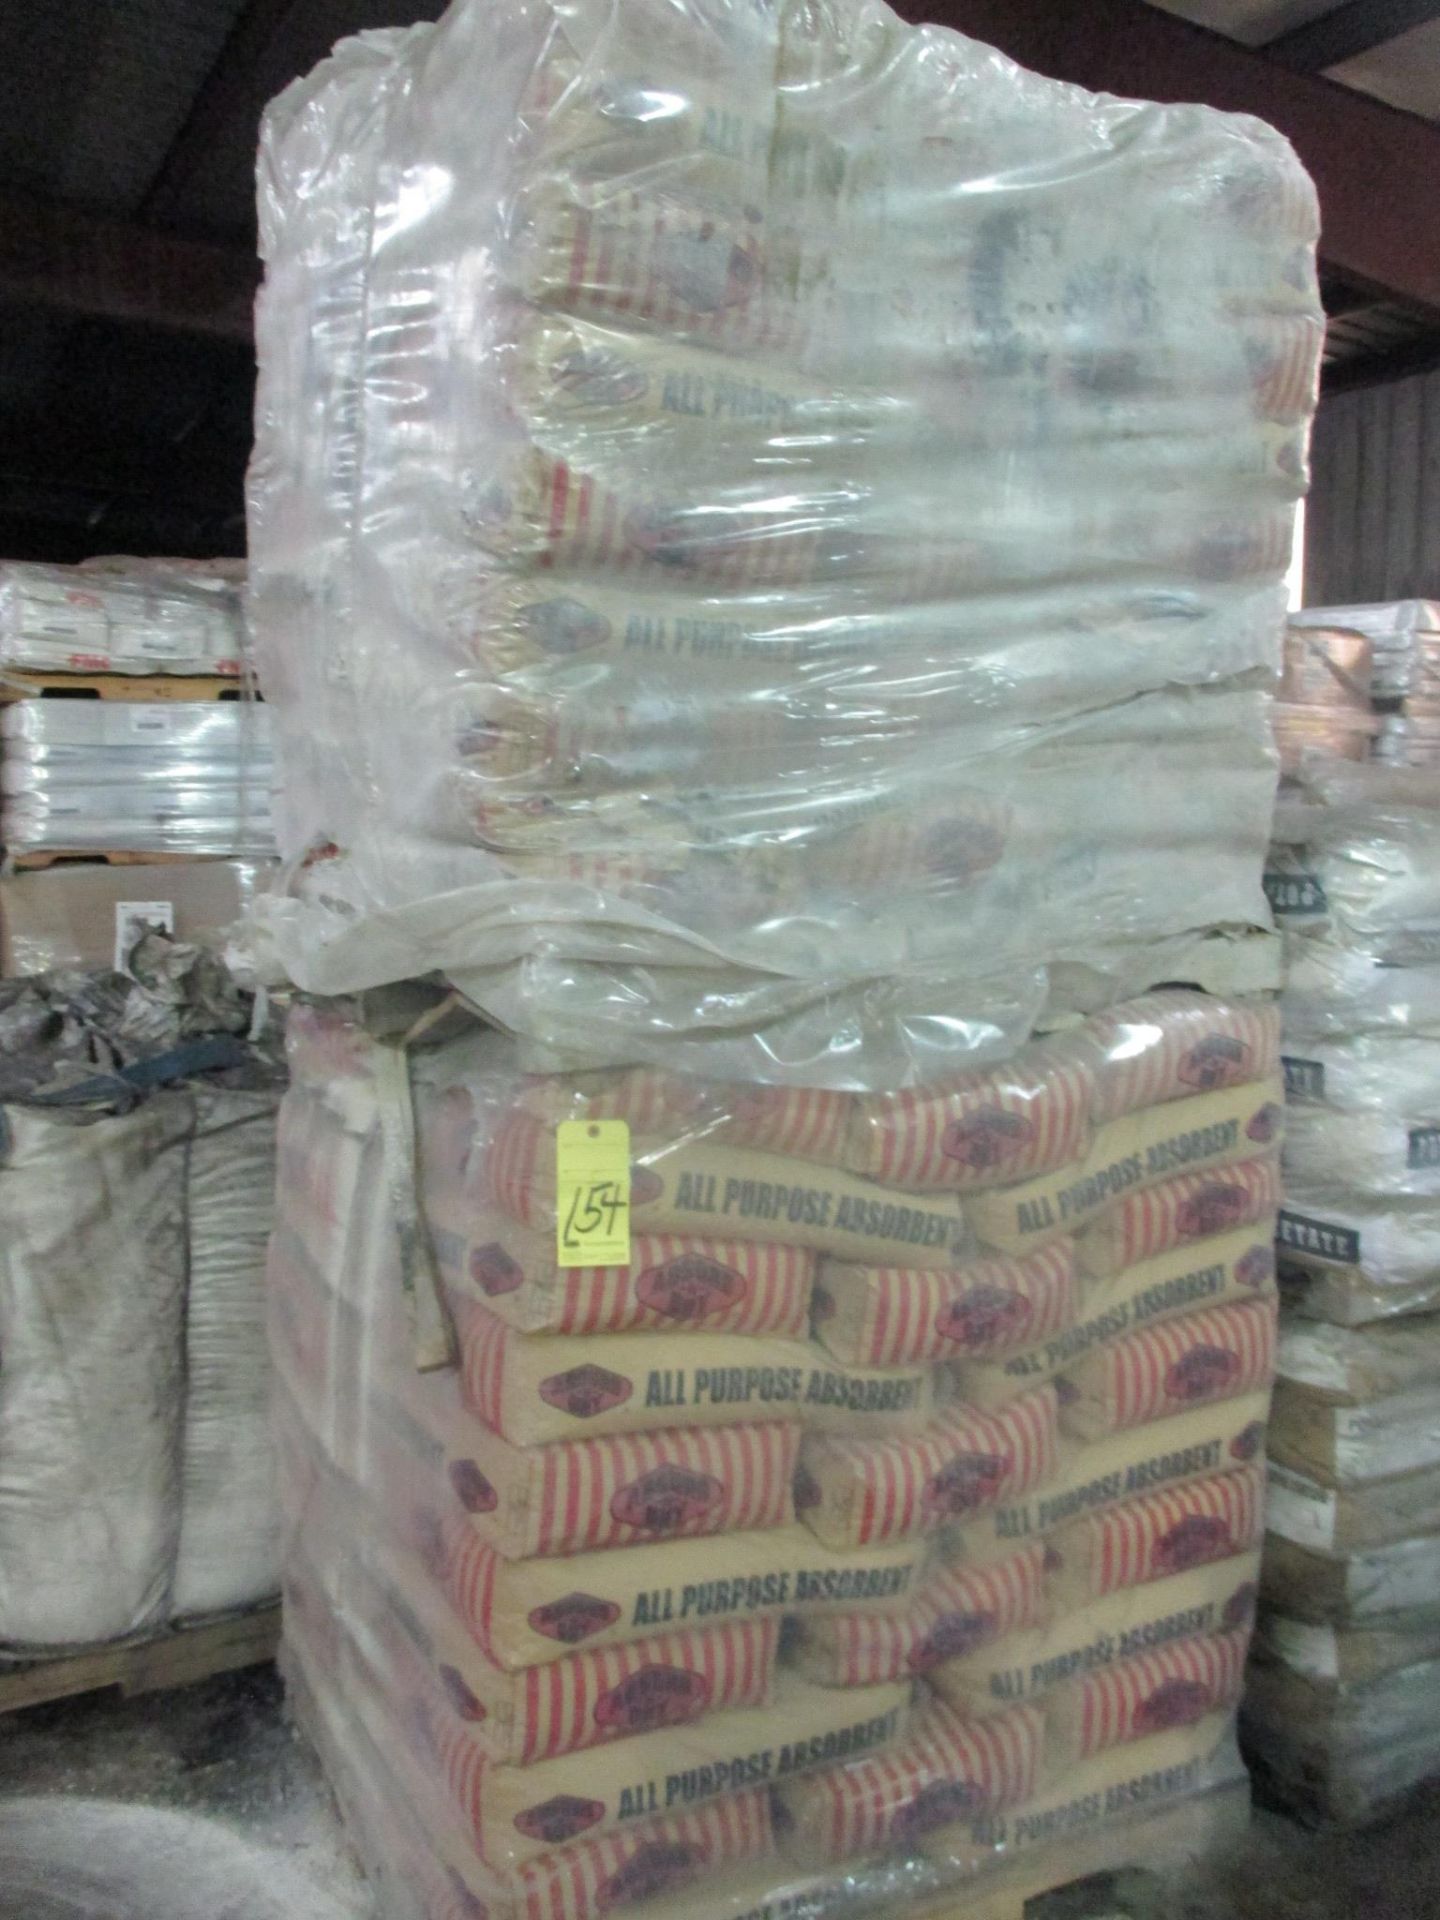 LOT OF OIL DRY ABSORBENT (approx. 100 bags)